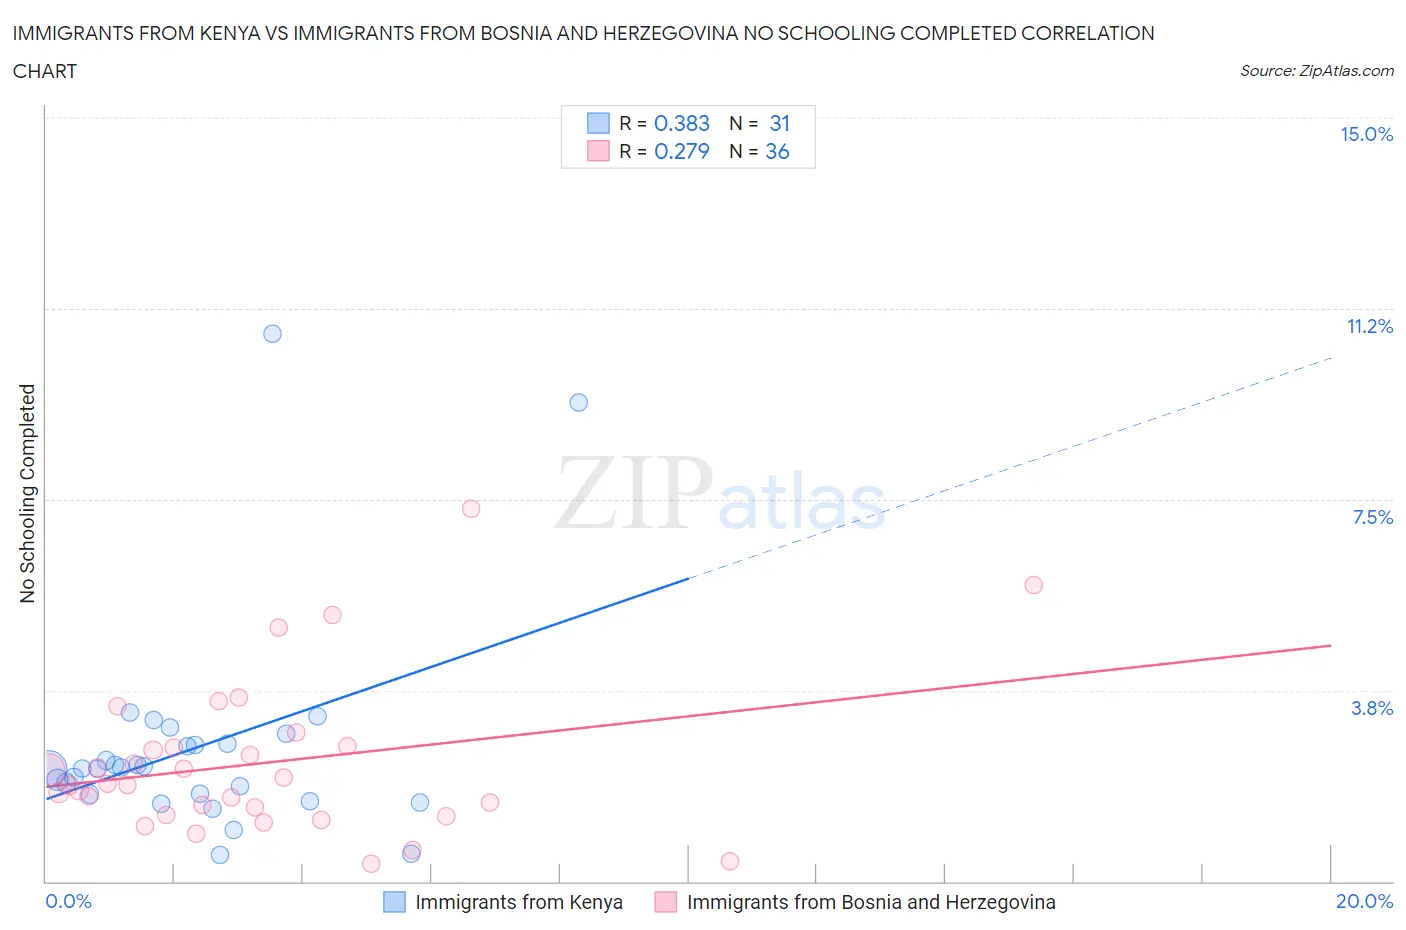 Immigrants from Kenya vs Immigrants from Bosnia and Herzegovina No Schooling Completed